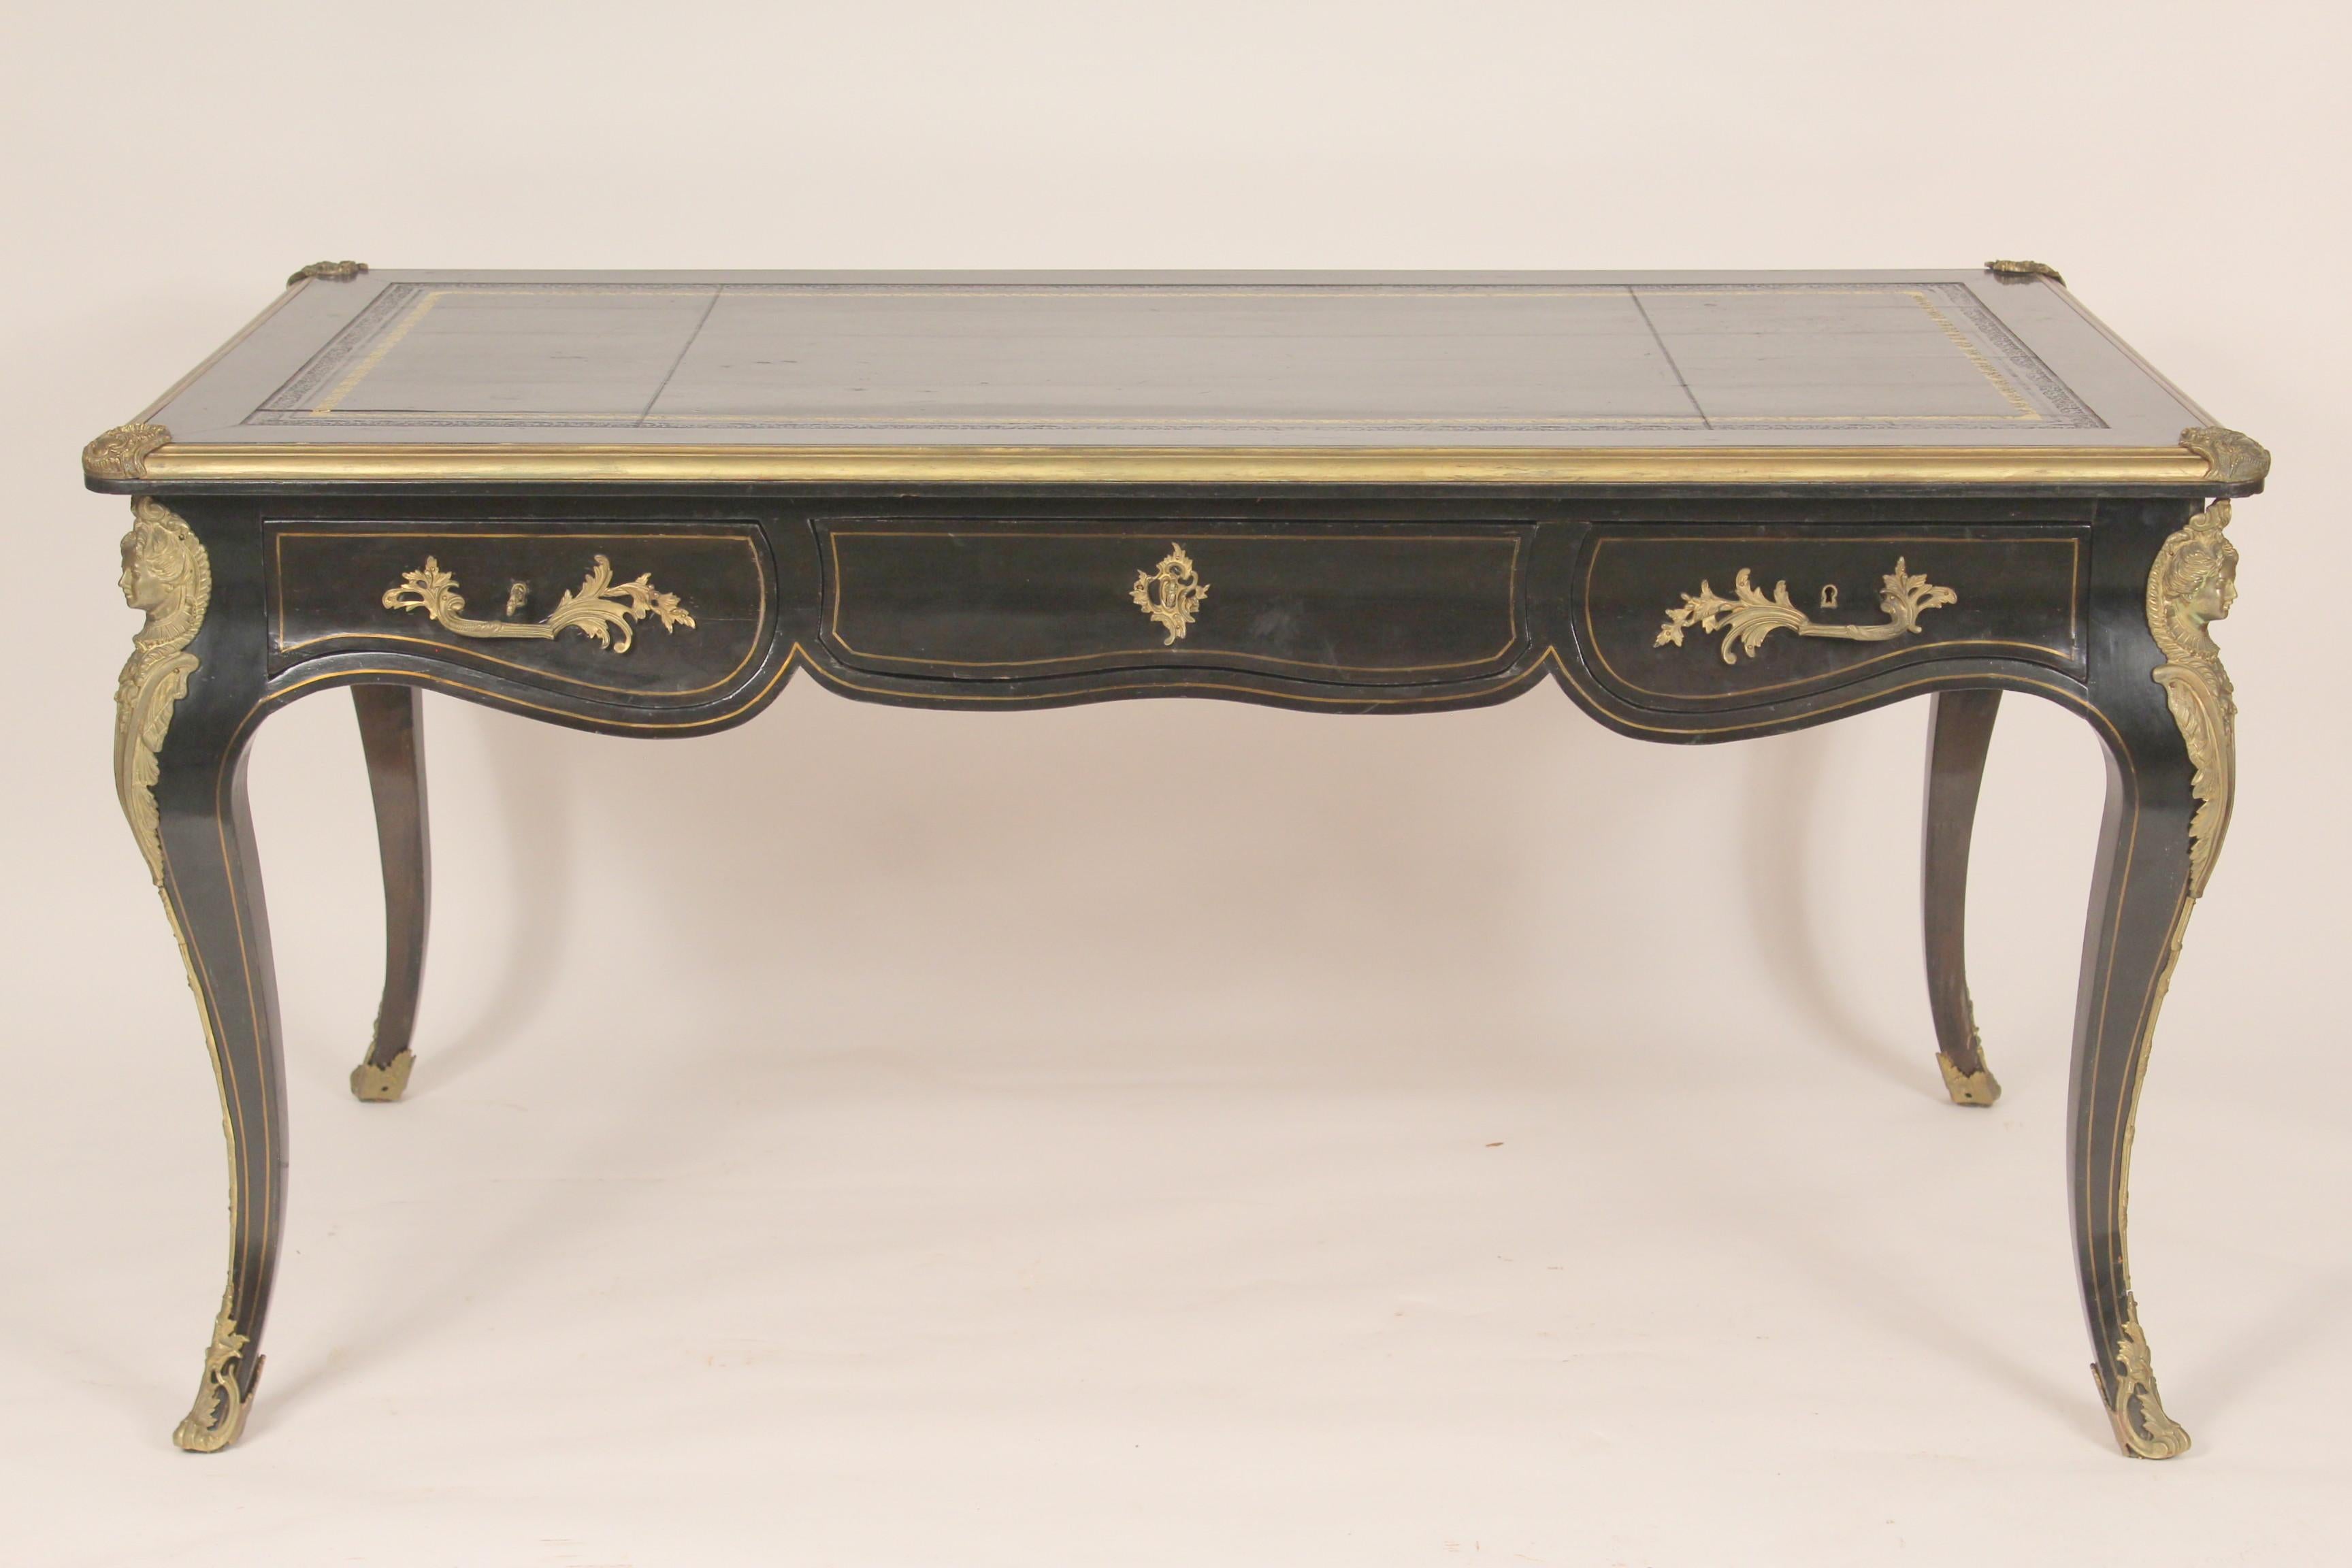 Antique Louis XV style bronze mounted black lacquer bureau plat, circa 1920's. With nice quality bronze mounts, brass inlay, leather top and hand dove tailed drawer construction. Formerly sold by Antonio's Antiques, San Francisco, California.